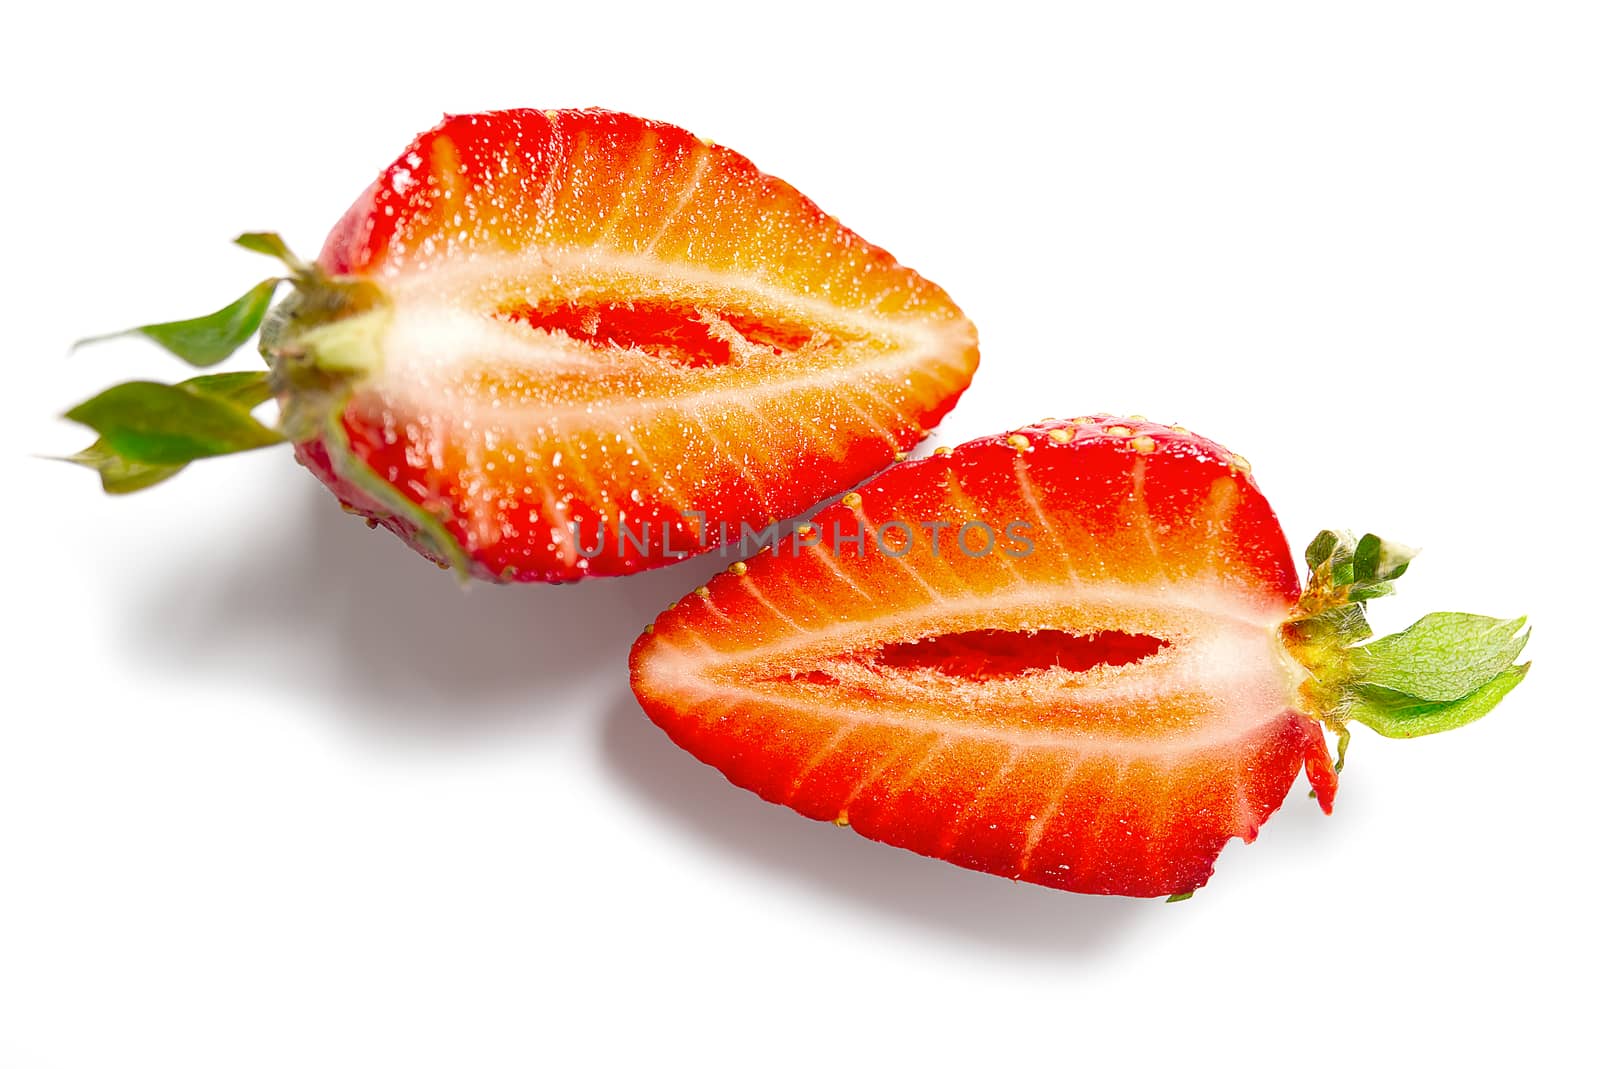 Fresh halved strawberry isolated on white background with clipping pat.